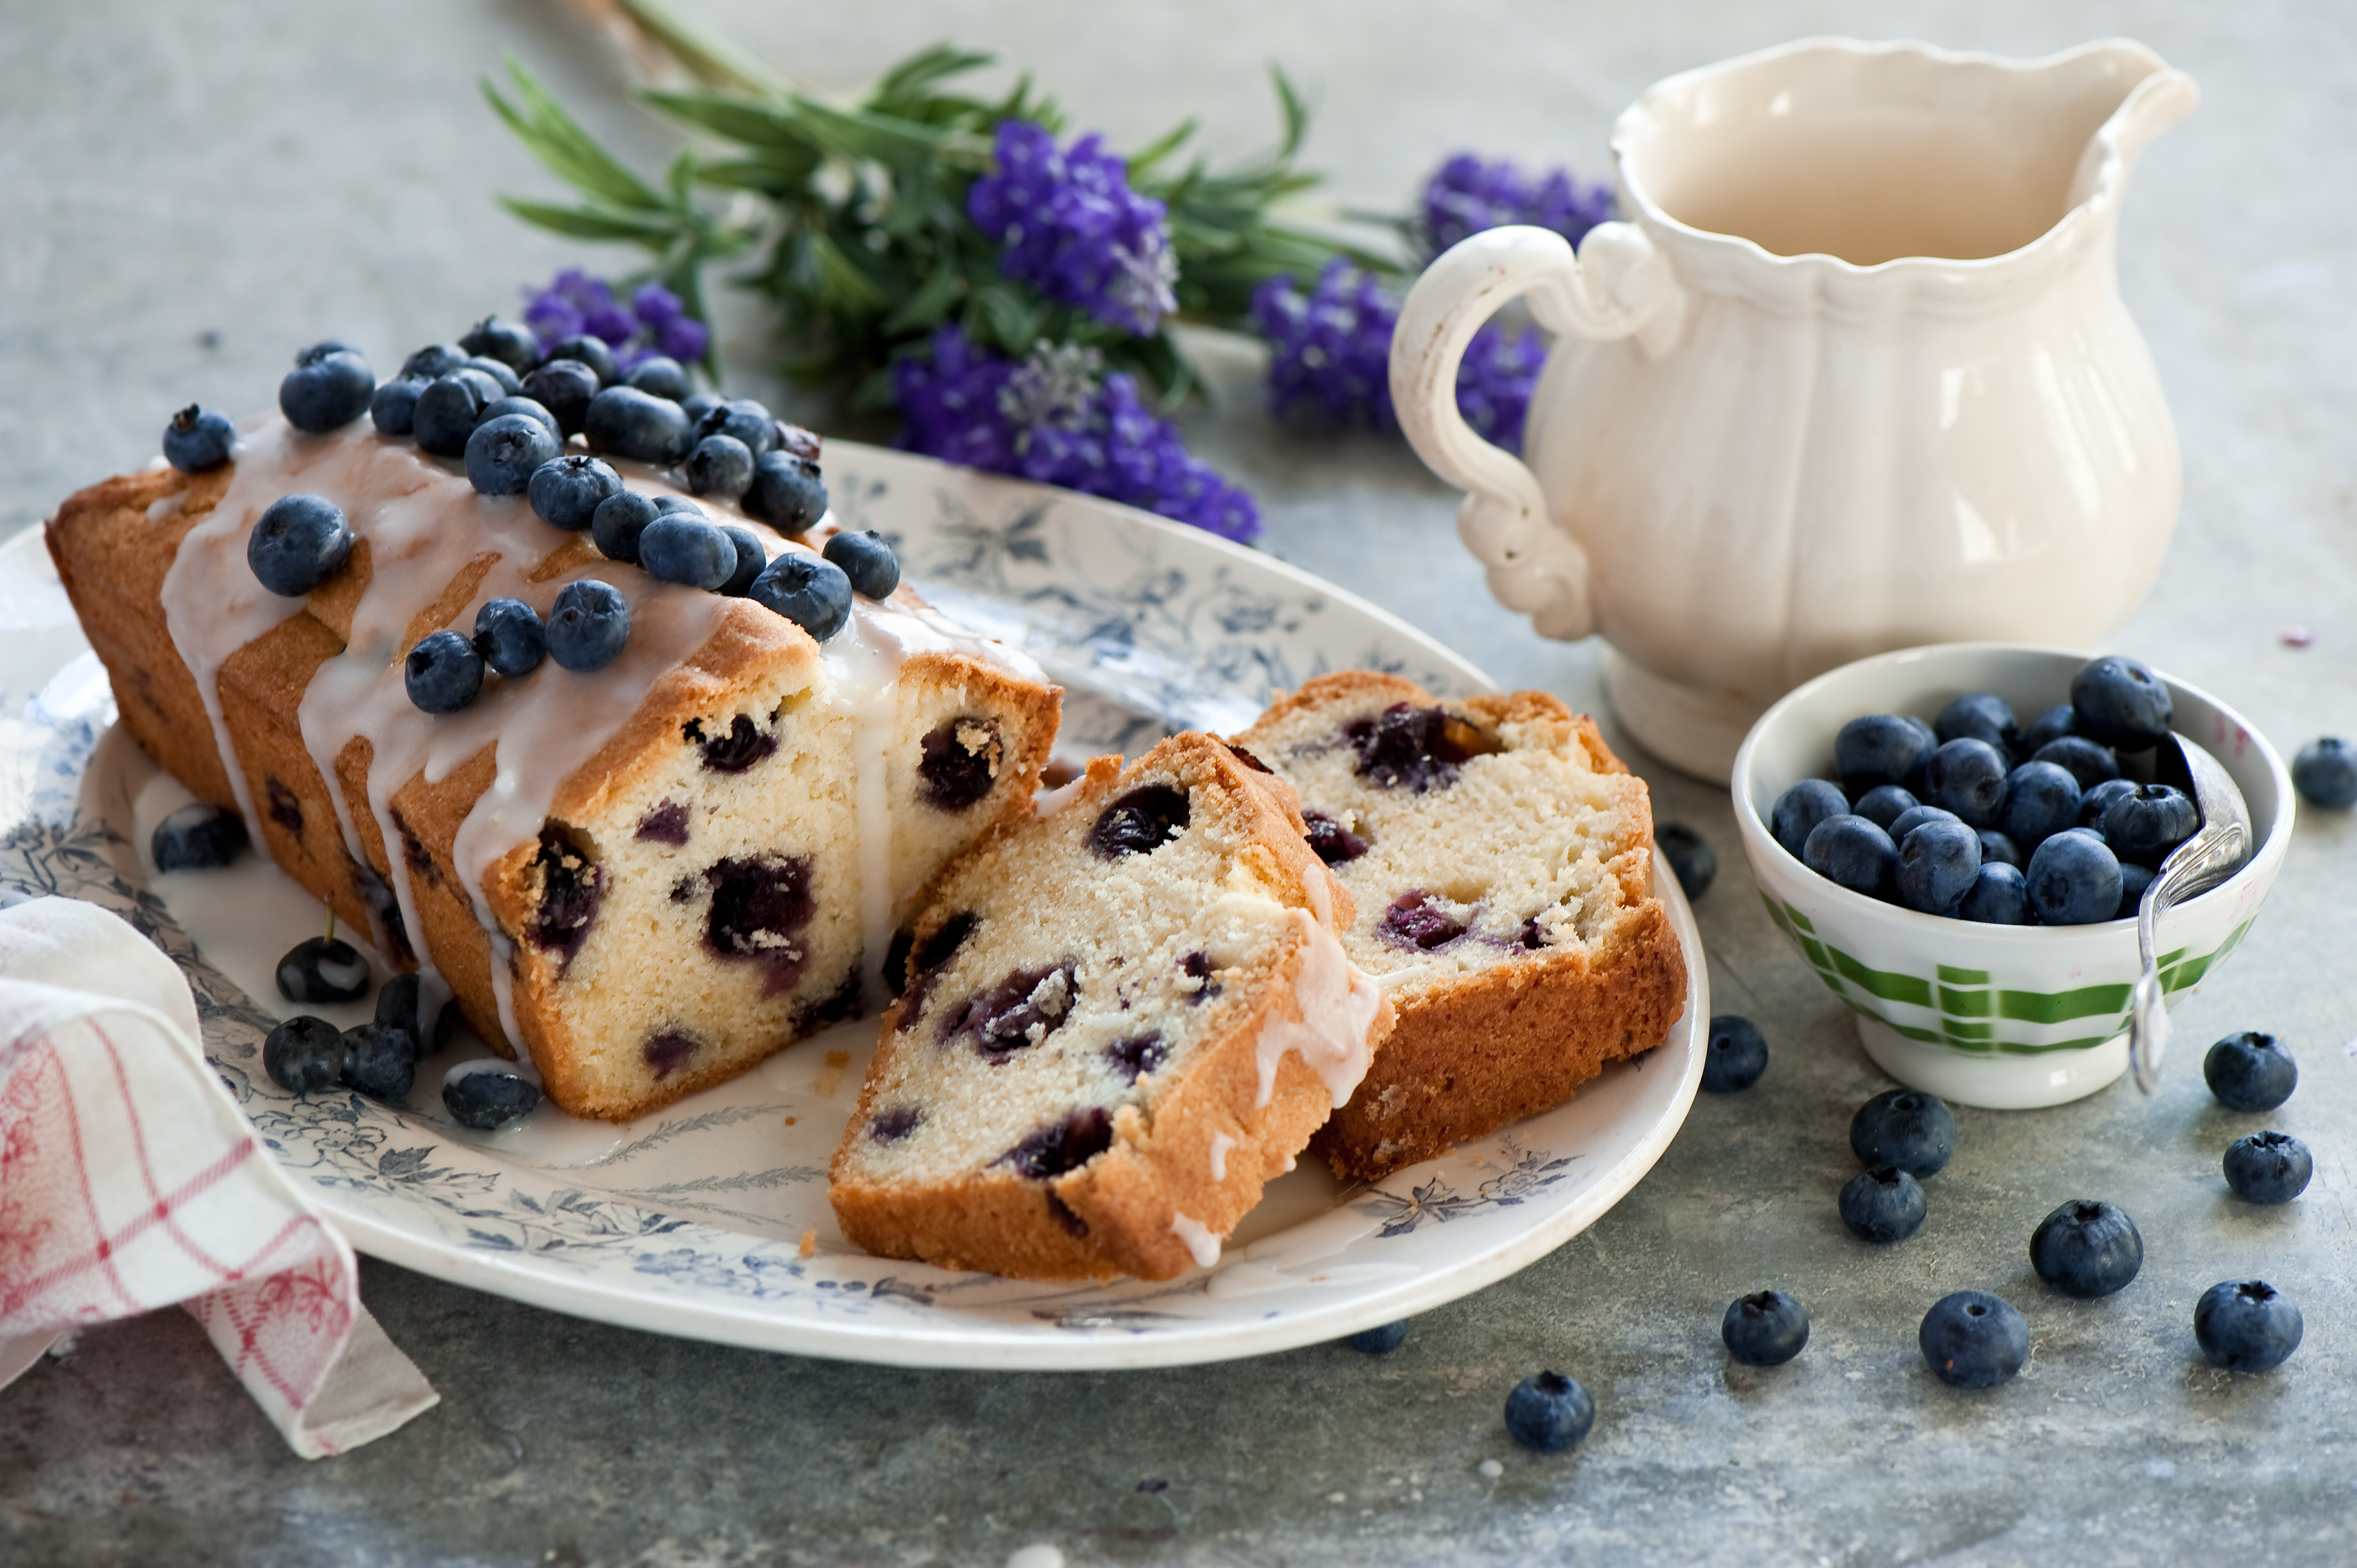 152168 download wallpaper food, bilberries, berries, cake, bakery products, baking, glaze screensavers and pictures for free